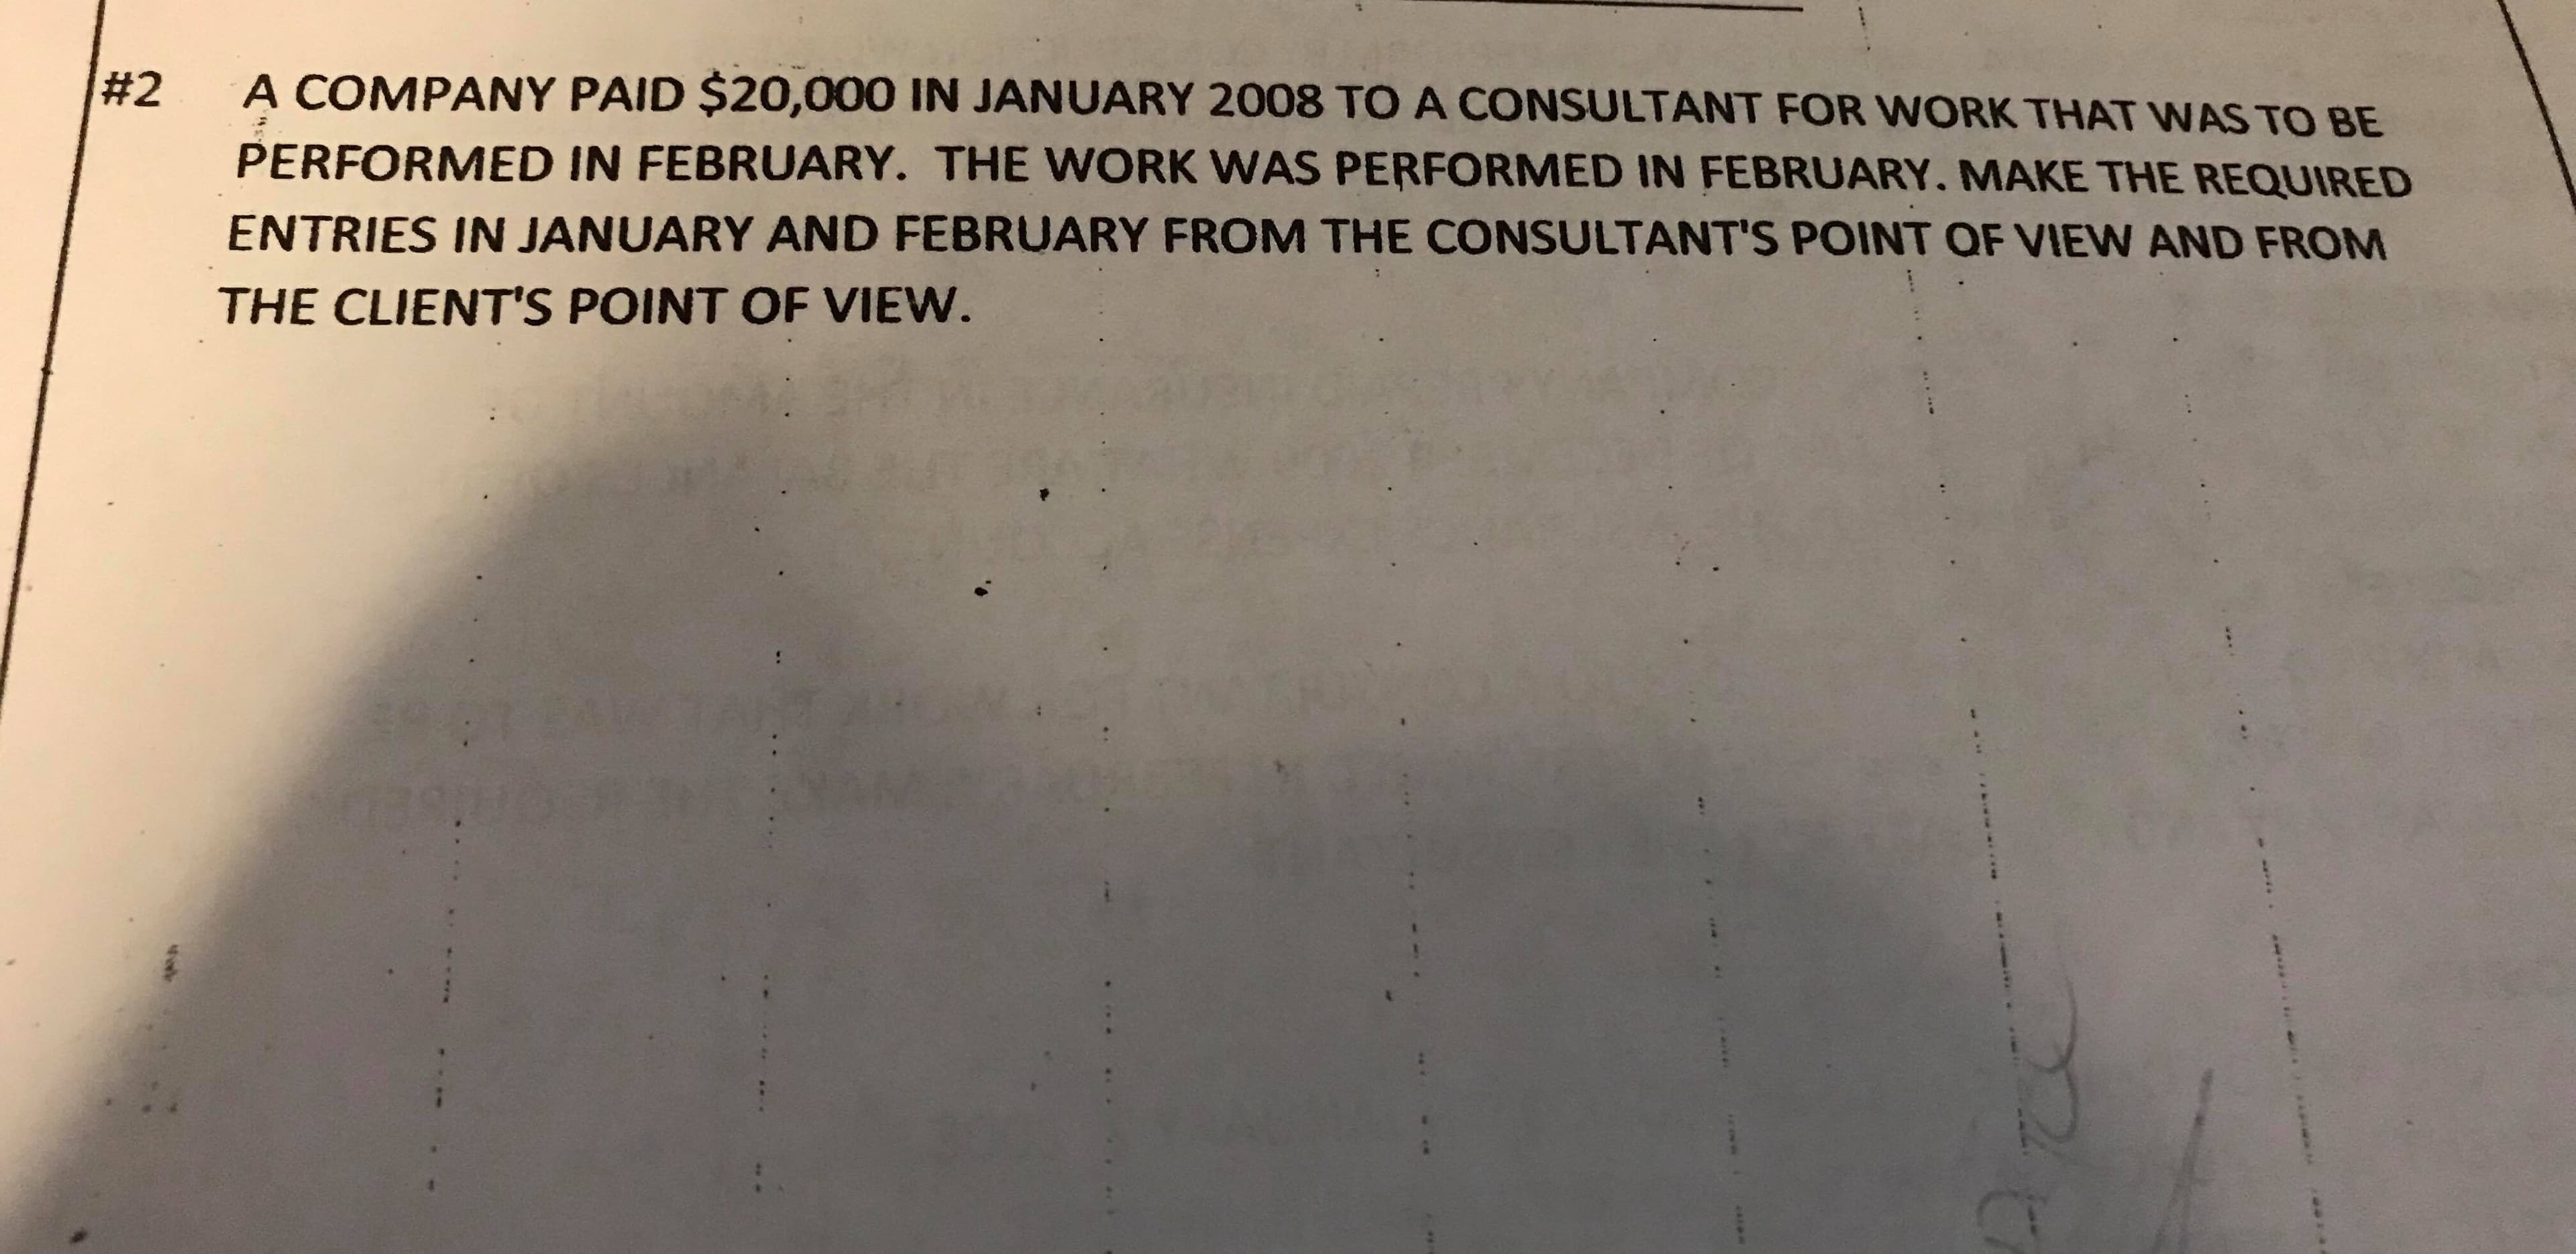 A COMPANY PAID $20,000 IN JANUARY 2008 TO A CONSULTANT FOR WORK THAT WAS TO BE
#2
PERFORMED IN FEBRUARY. THE WORK WAS PERFORMED IN FEBRUARY. MAKE THE REQUIRED
ENTRIES IN JANUARY AND FEBRUARY FROM THE CONSULTANT'S POINT OF VIEW AND FROM
THE CLIENT'S POINT OF VIEW.
